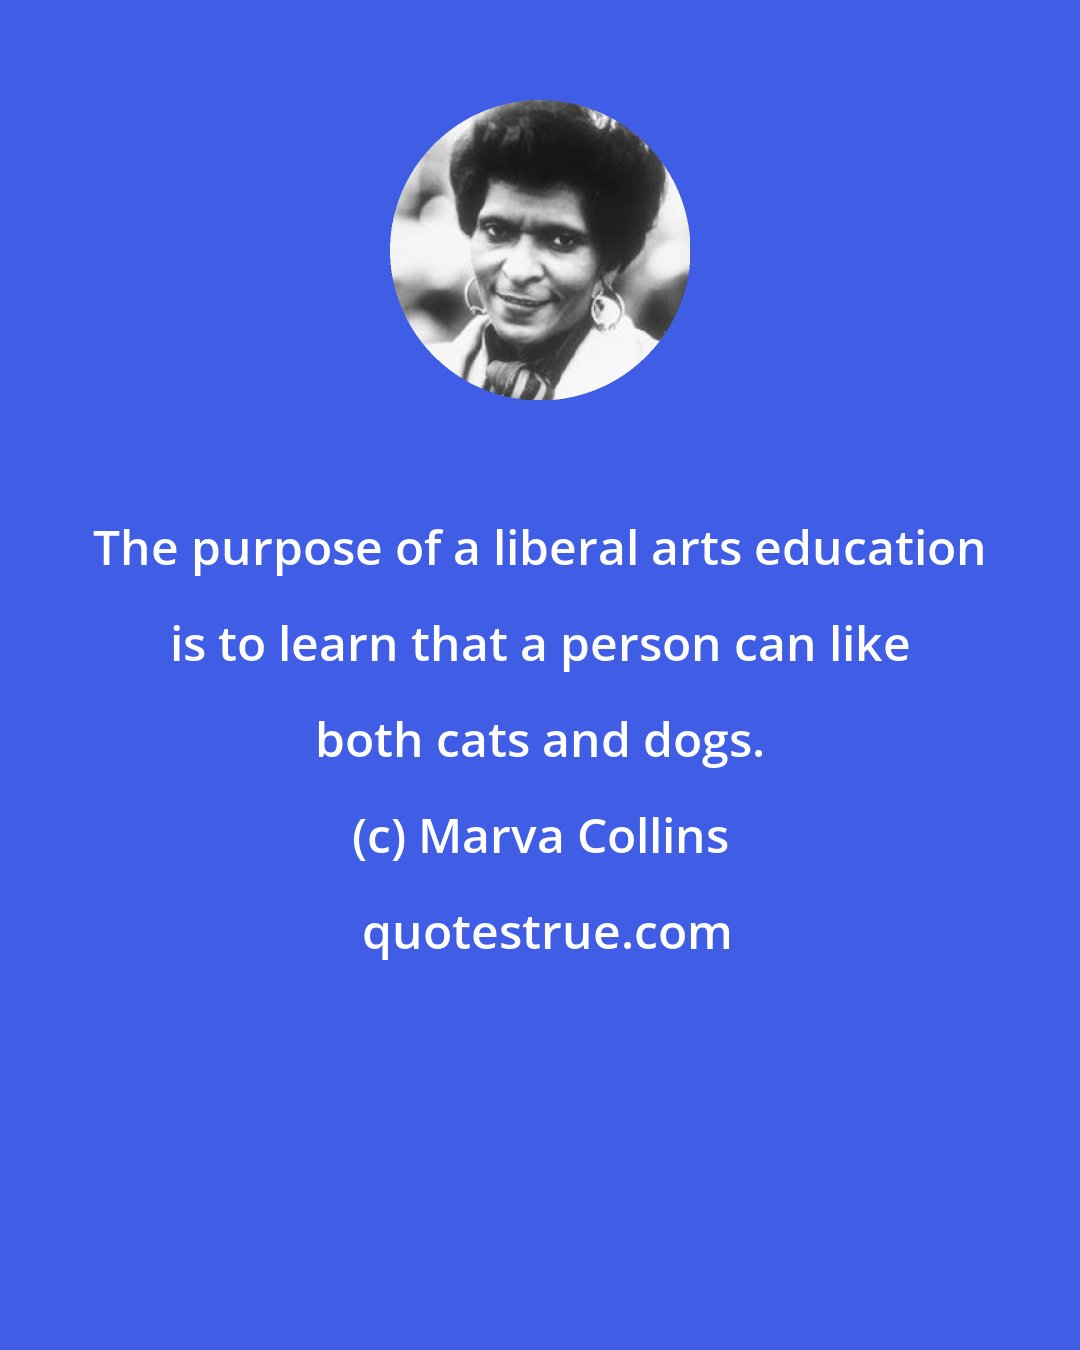 Marva Collins: The purpose of a liberal arts education is to learn that a person can like both cats and dogs.